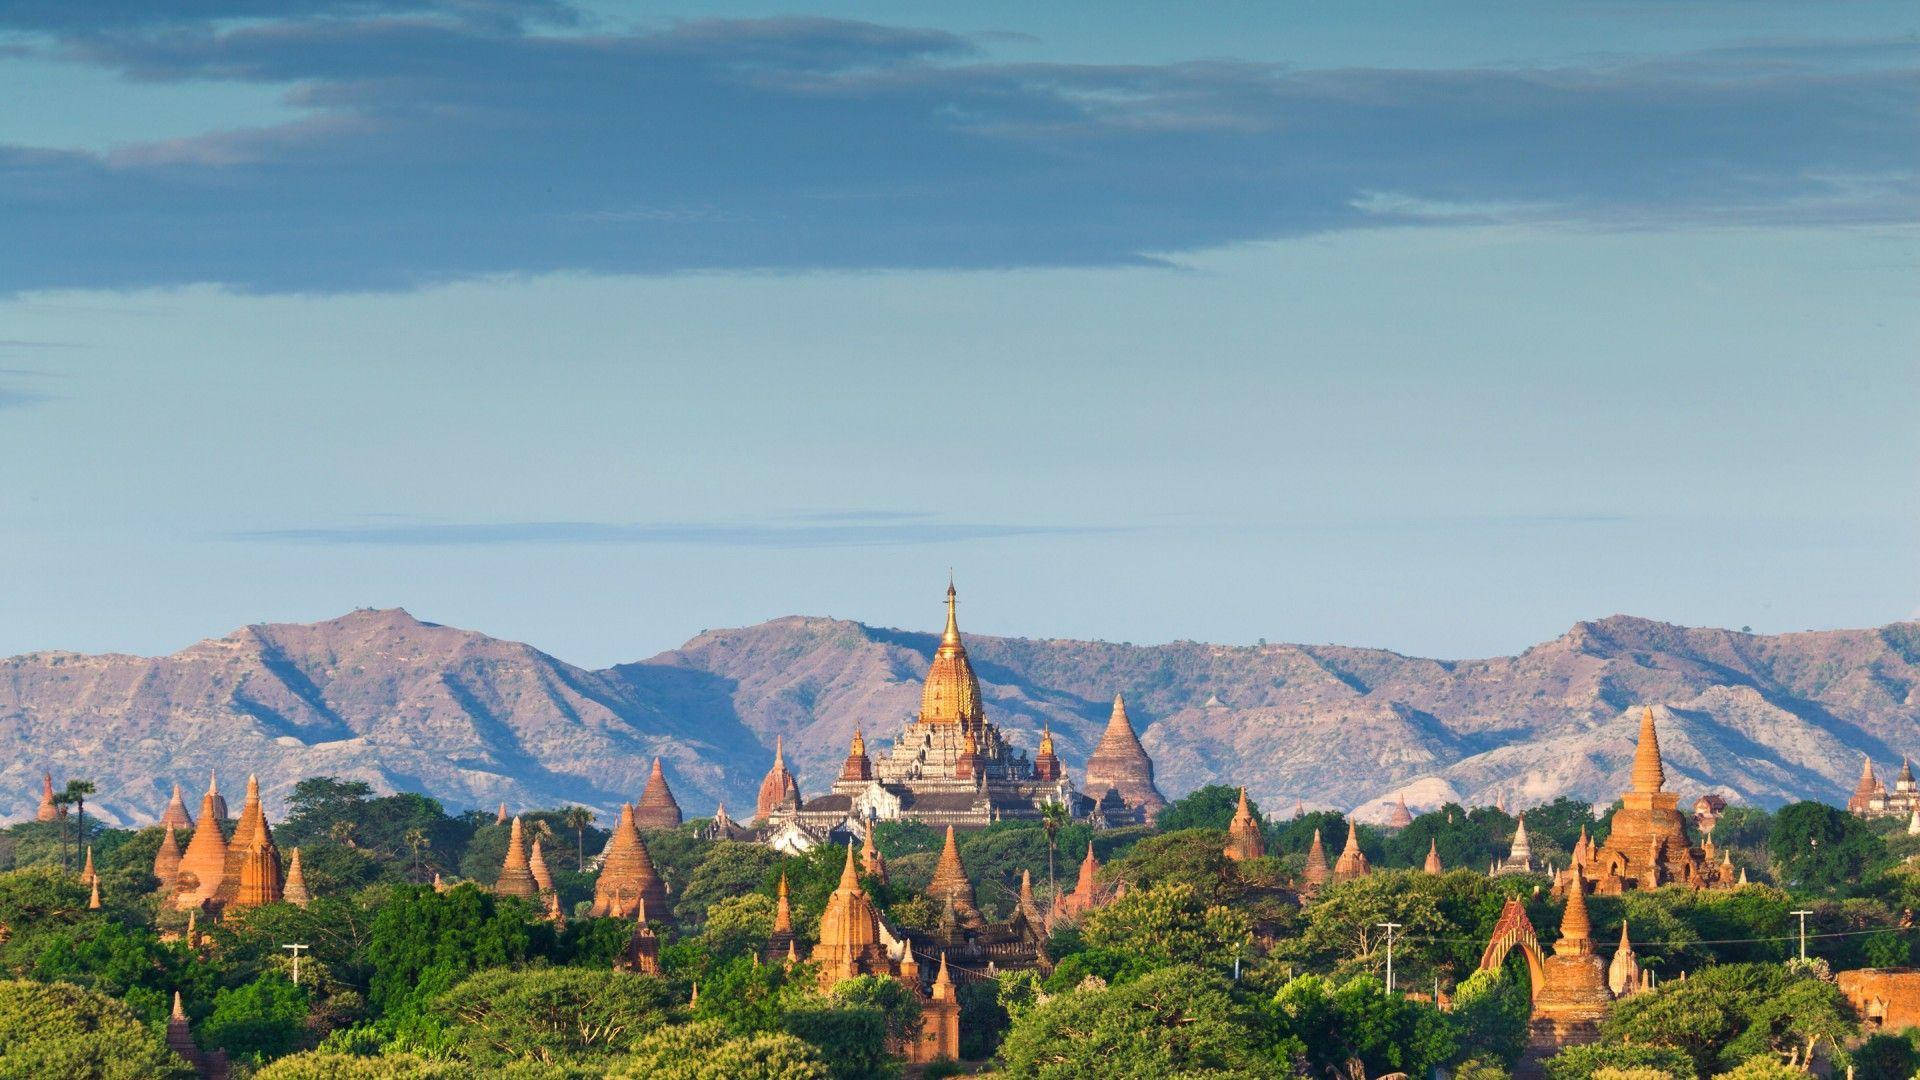 Myanmar Temples And Mountains Wallpaper